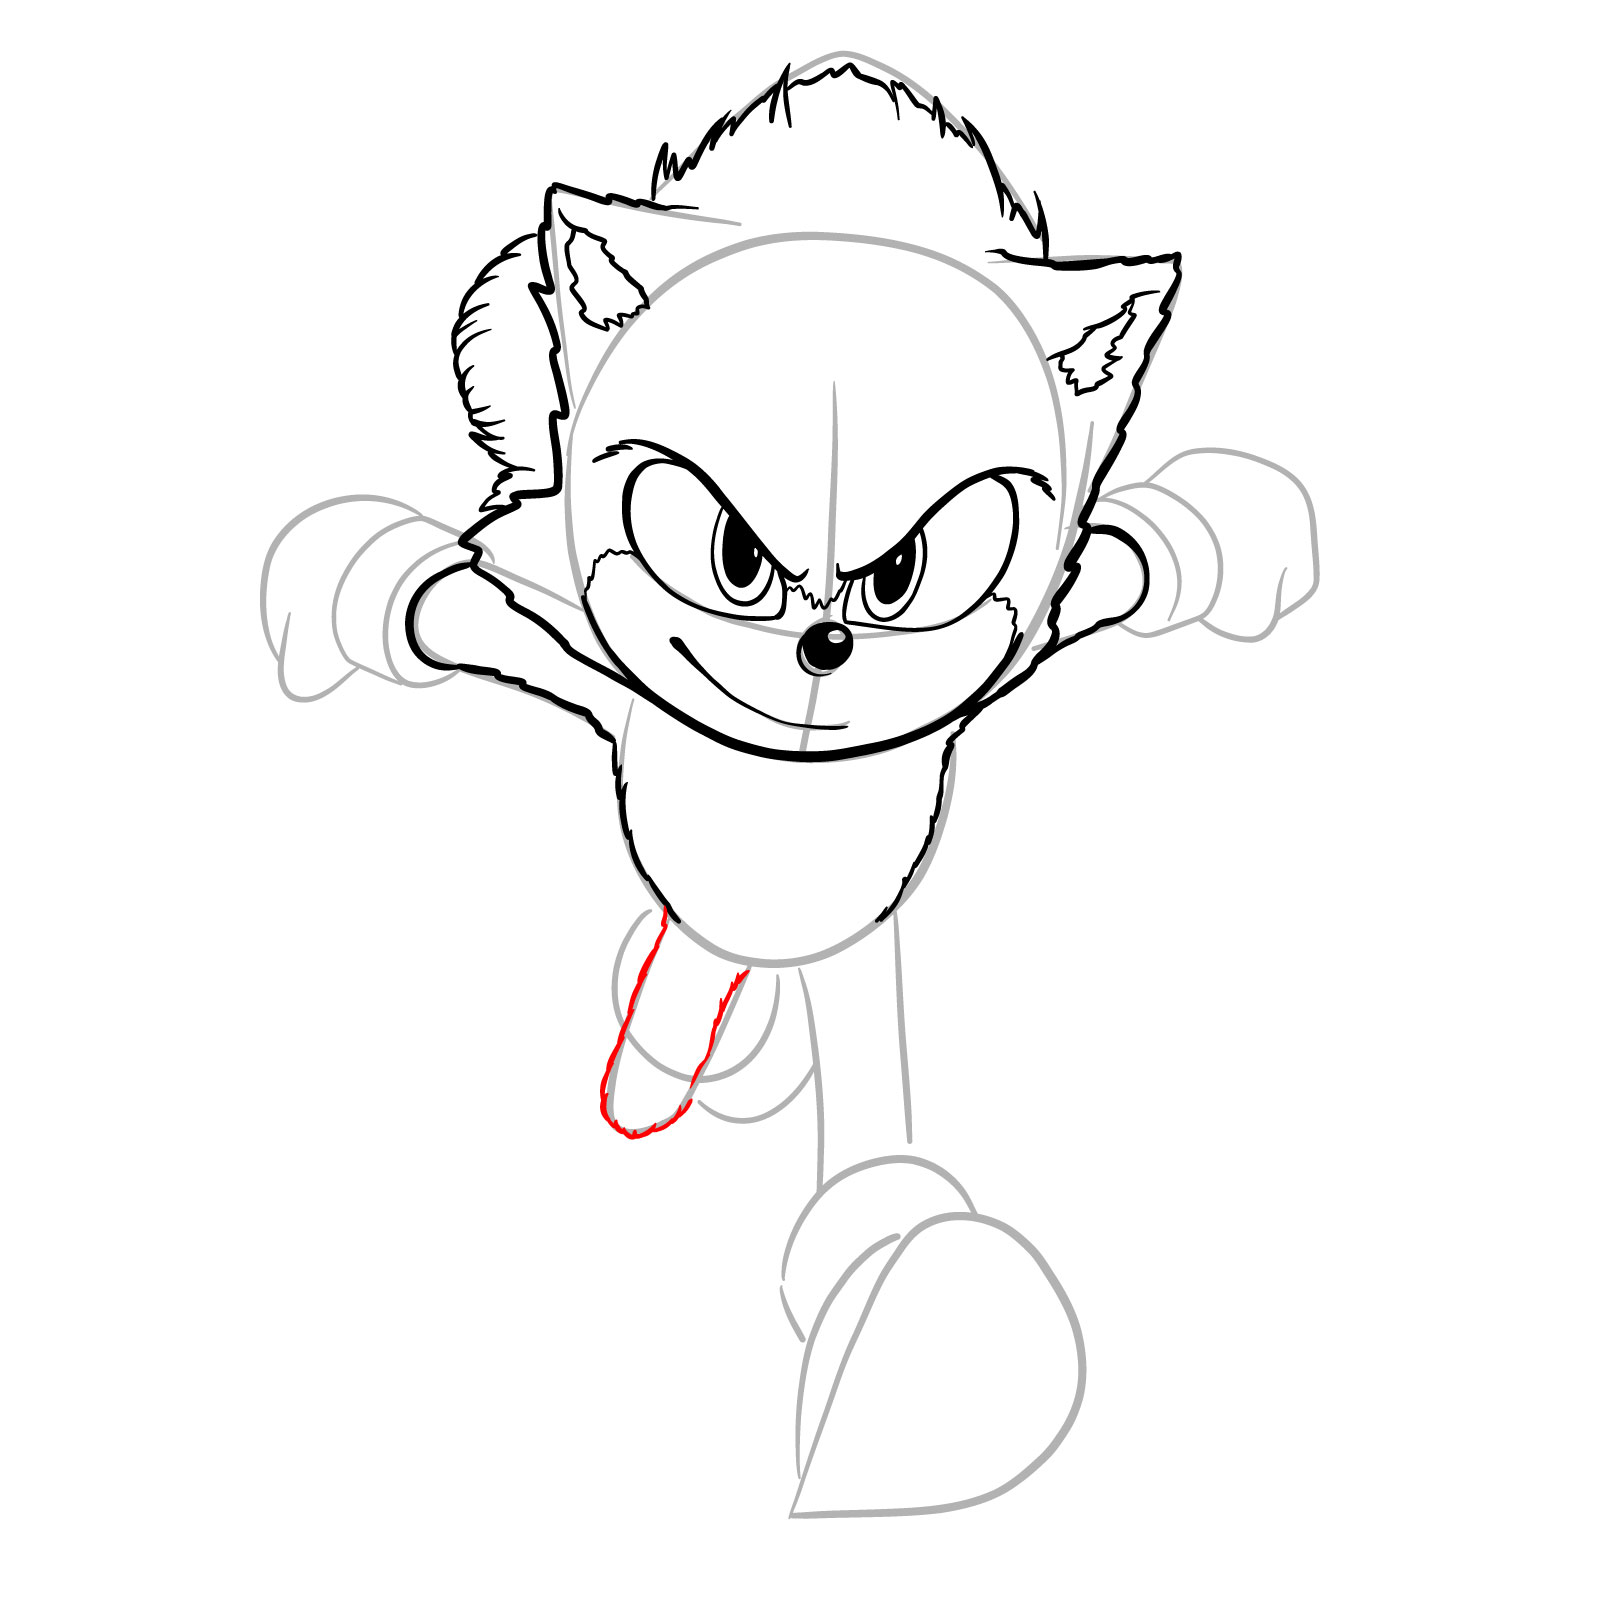 How to draw Sonic from the movie - step 17